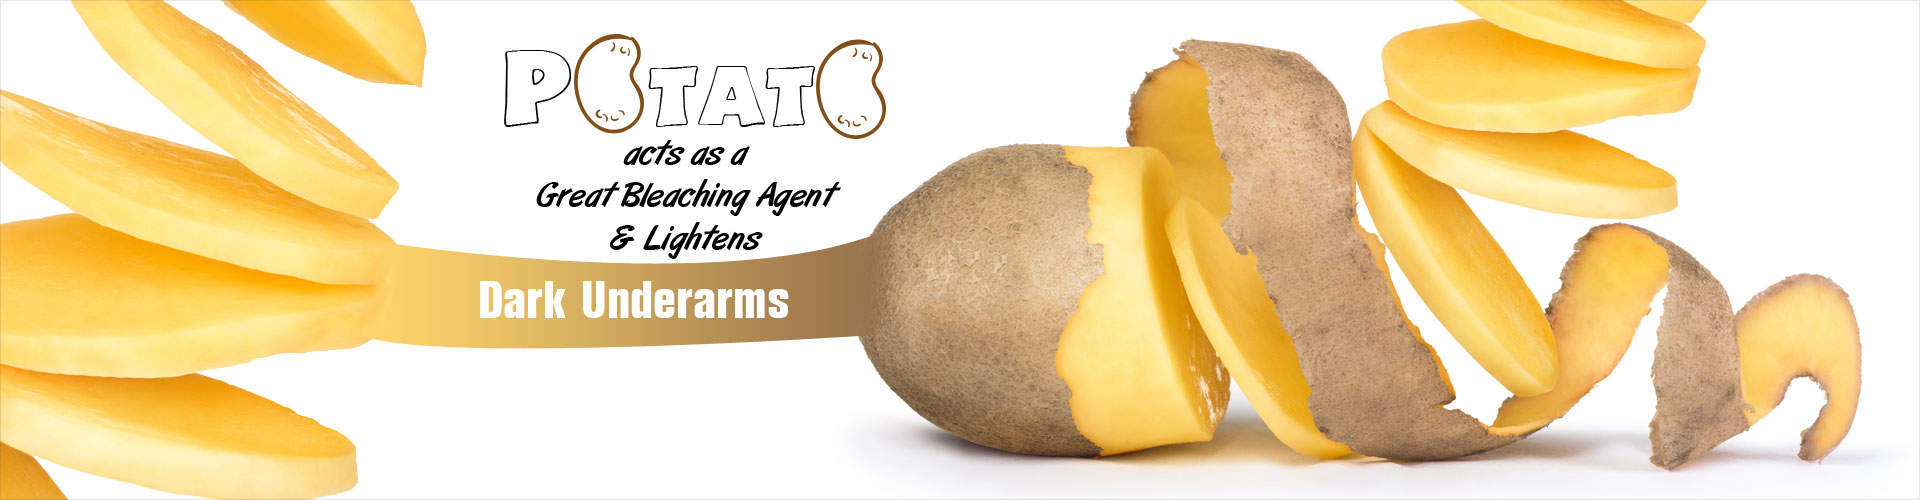 Potato Acts as a Great Bleaching Agent and Lightens Dark Underarms